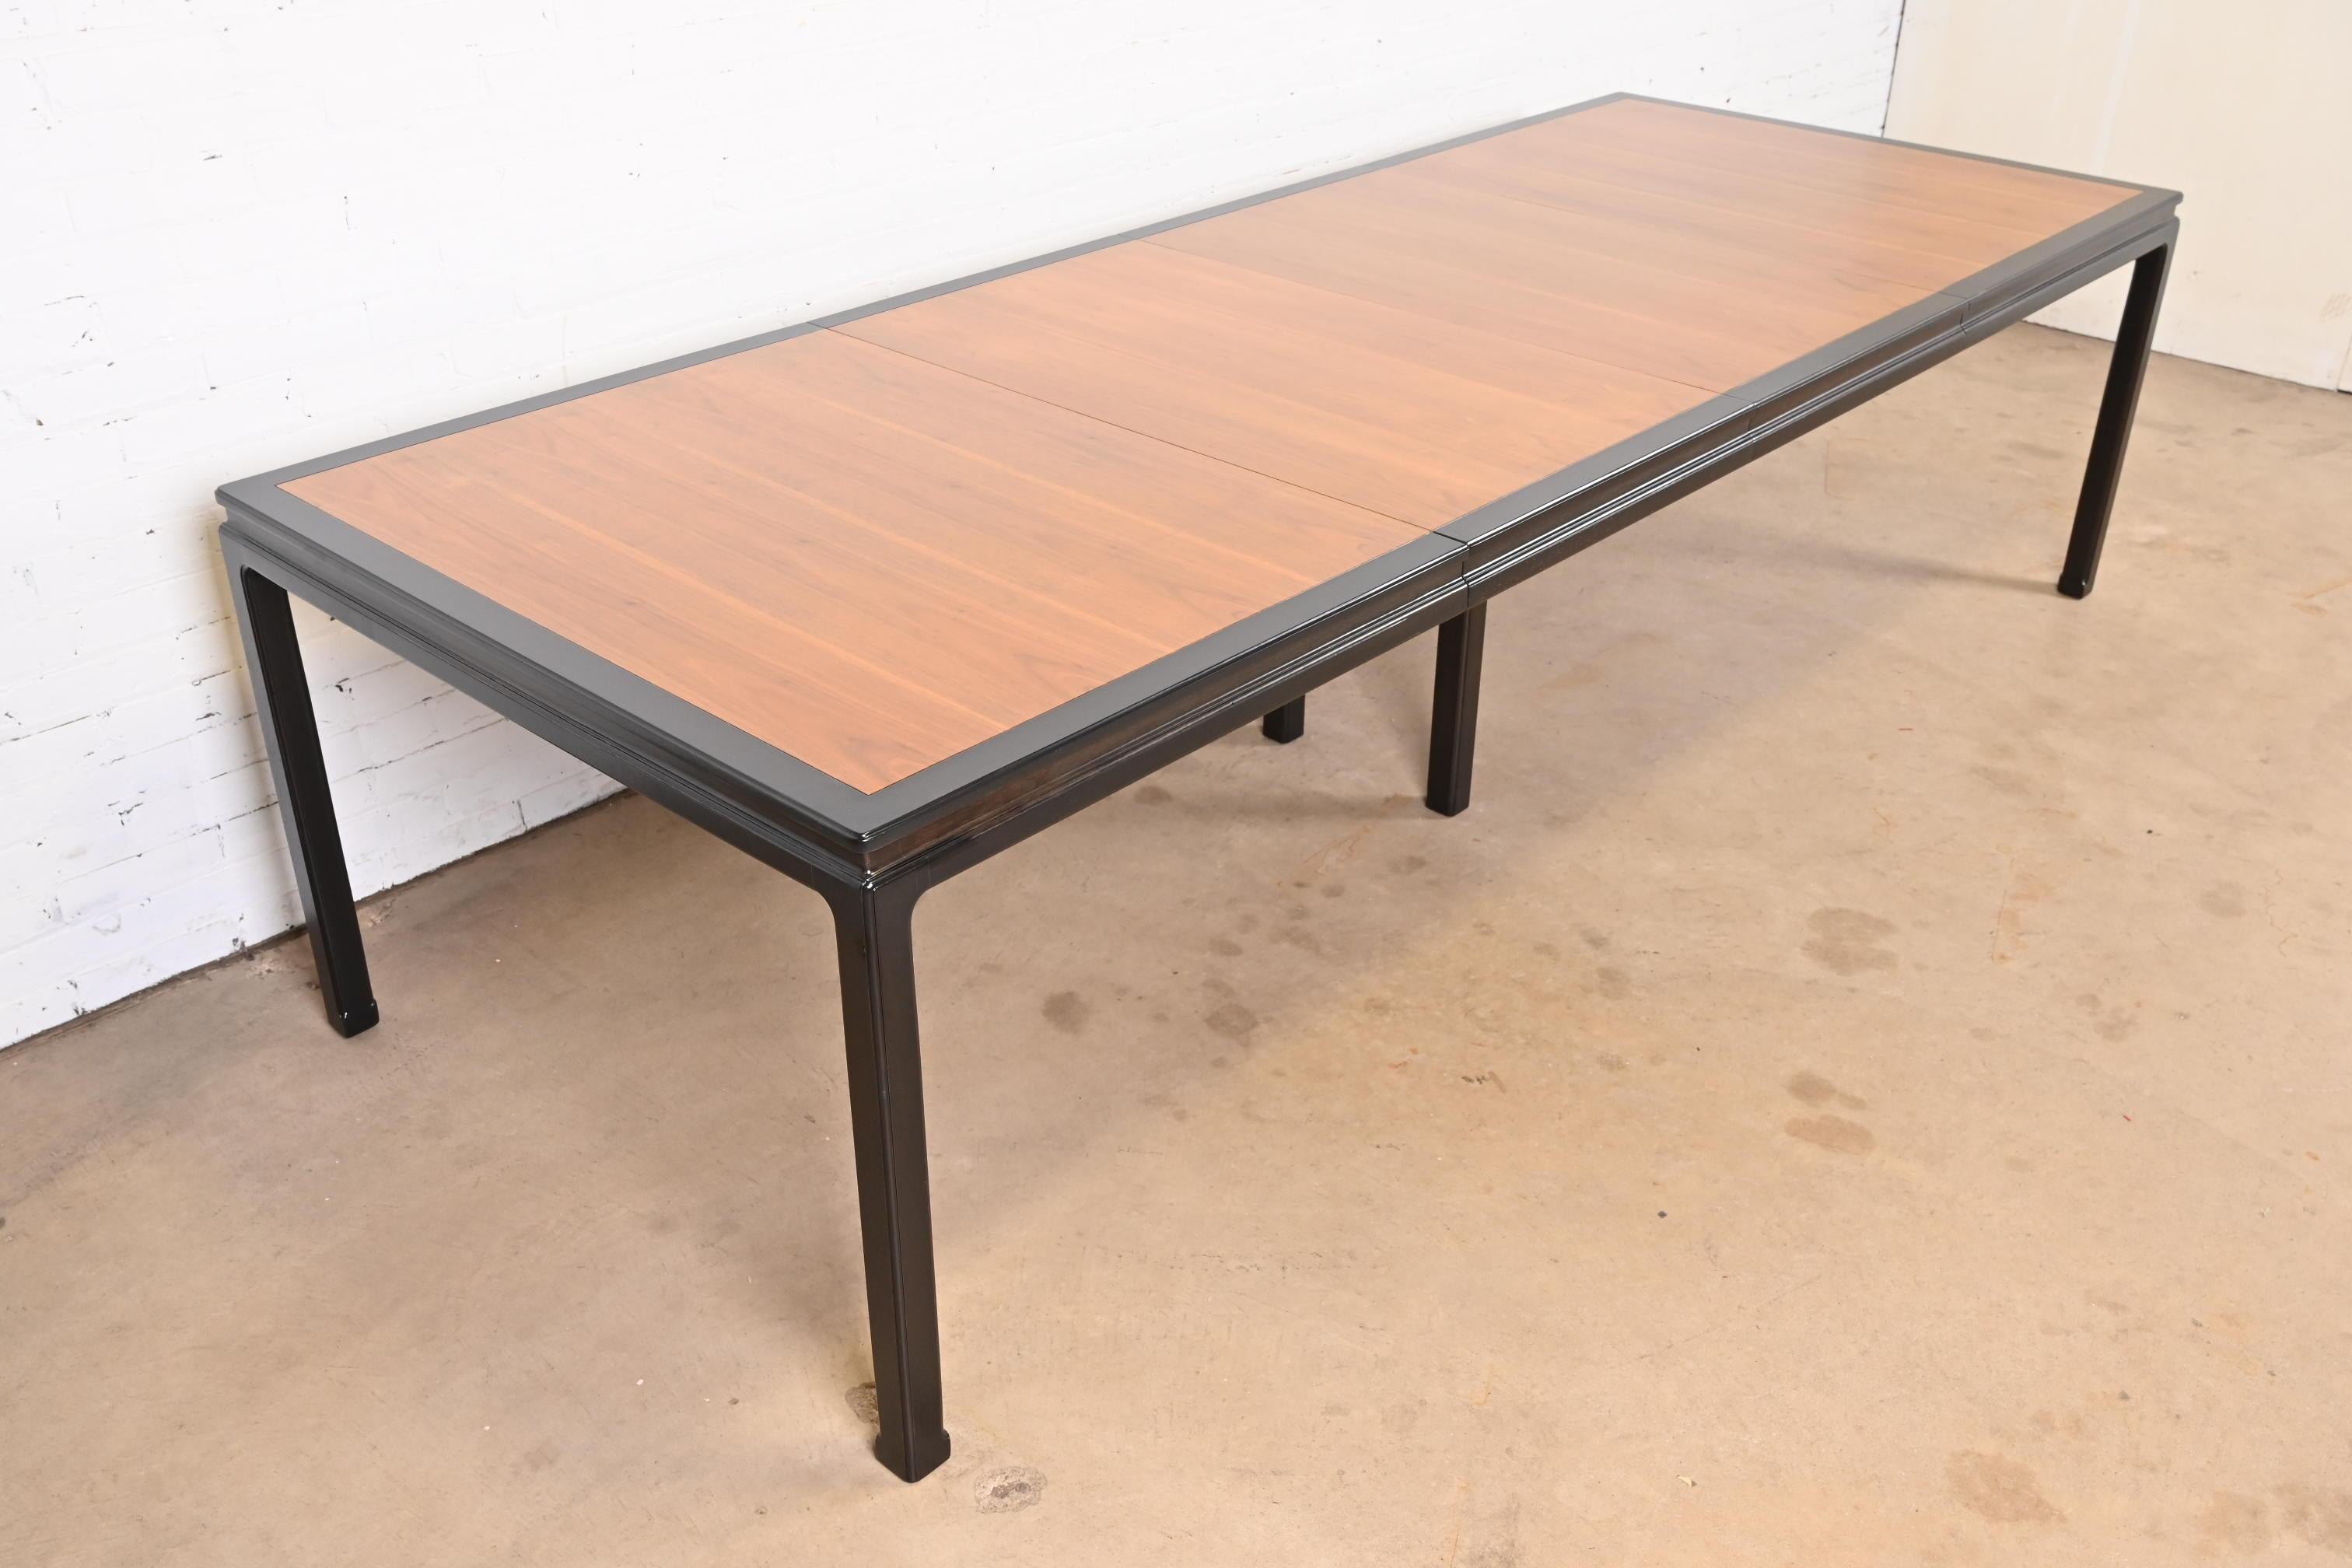 Mid-20th Century Edward Wormley for Dunbar Walnut and Ebonized Dining Table, Newly Refinished For Sale